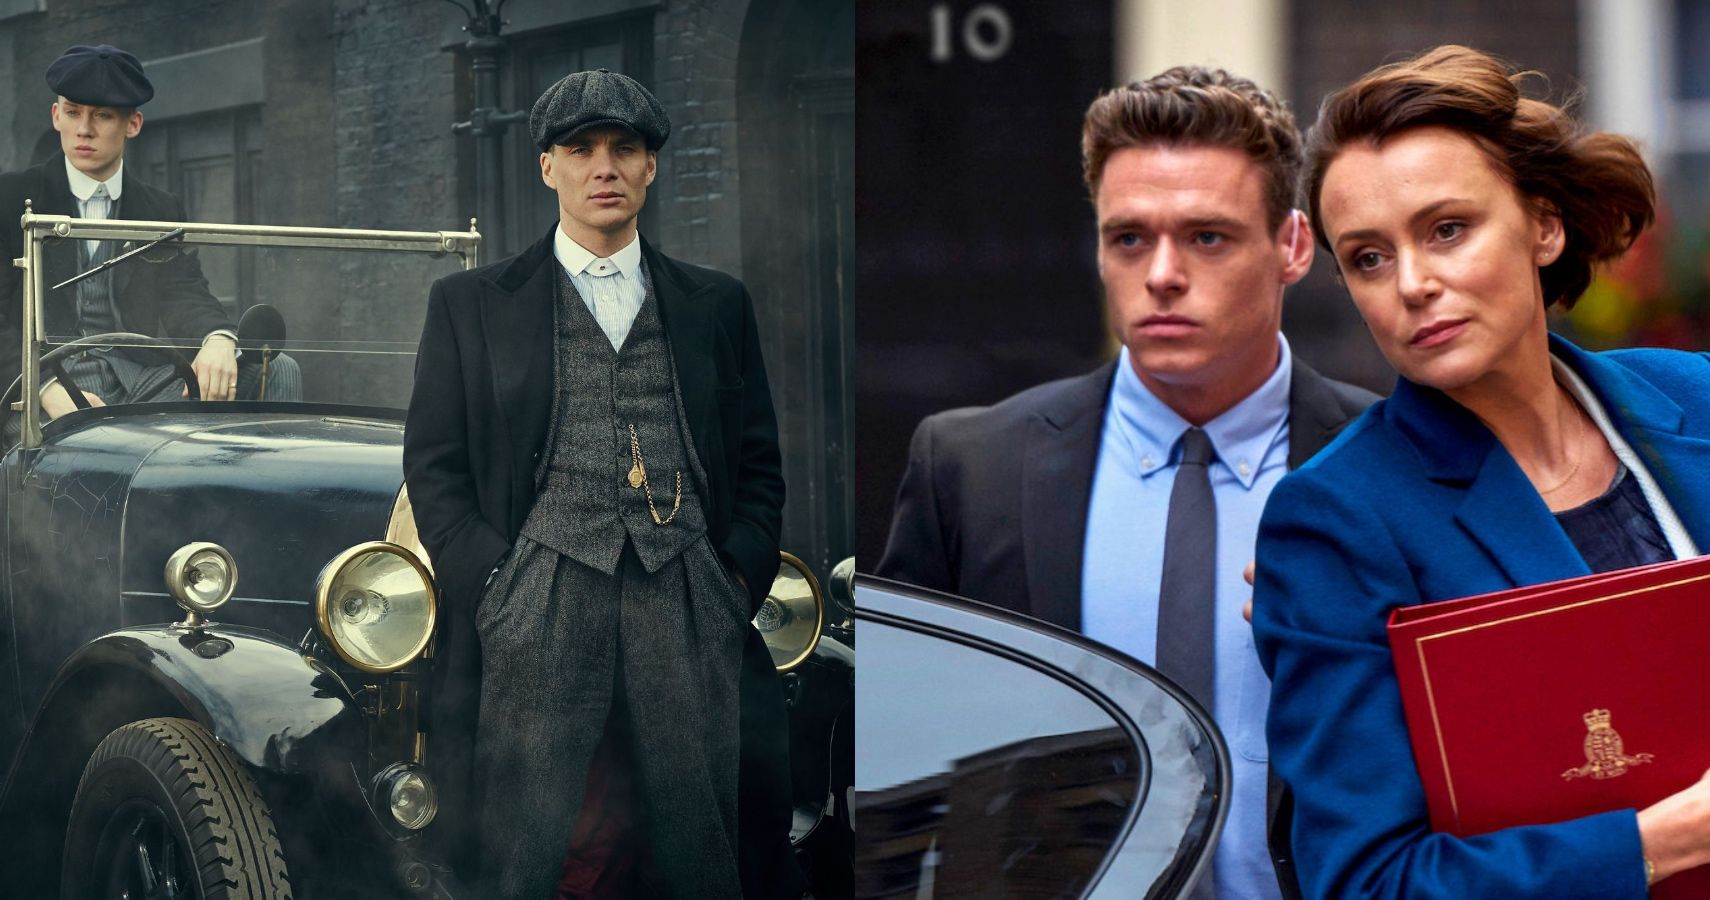 Top 10 BBC Drama Shows Available on Netflix Spring 2020 (according to IMDb)